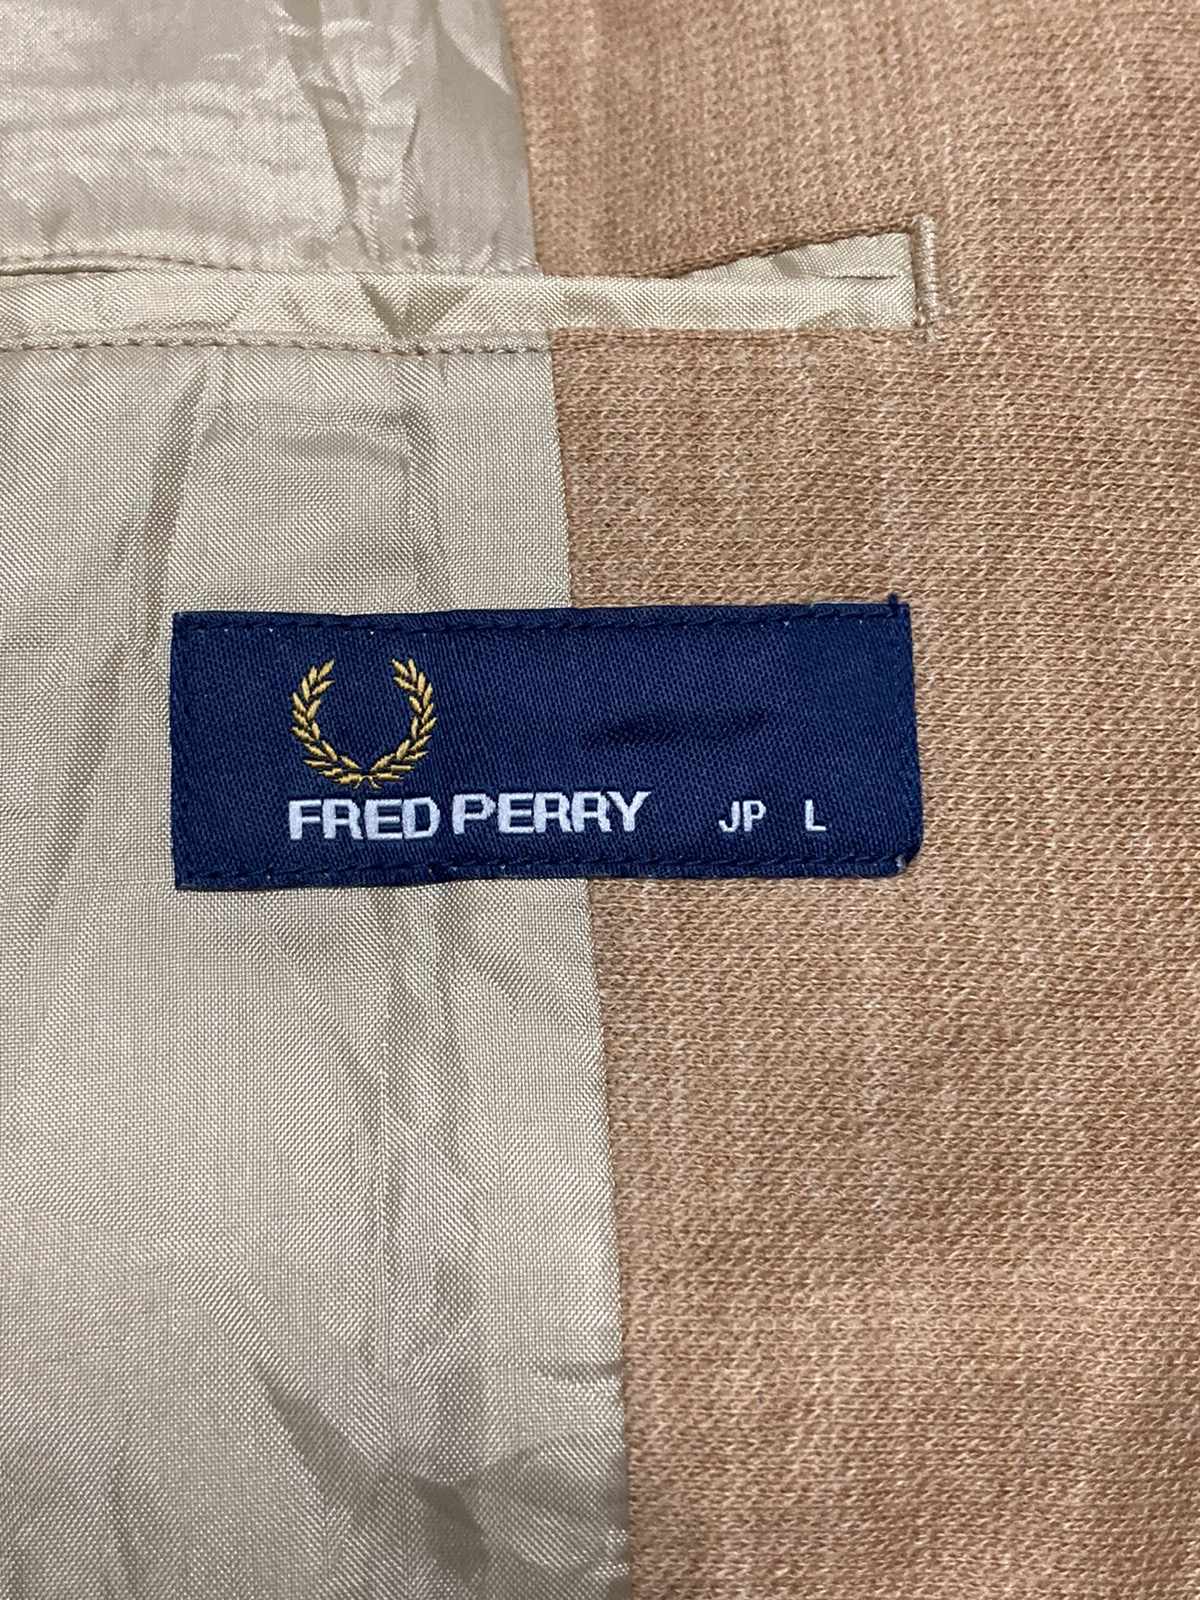 FRED PERRY LIGHT JACKET - 5